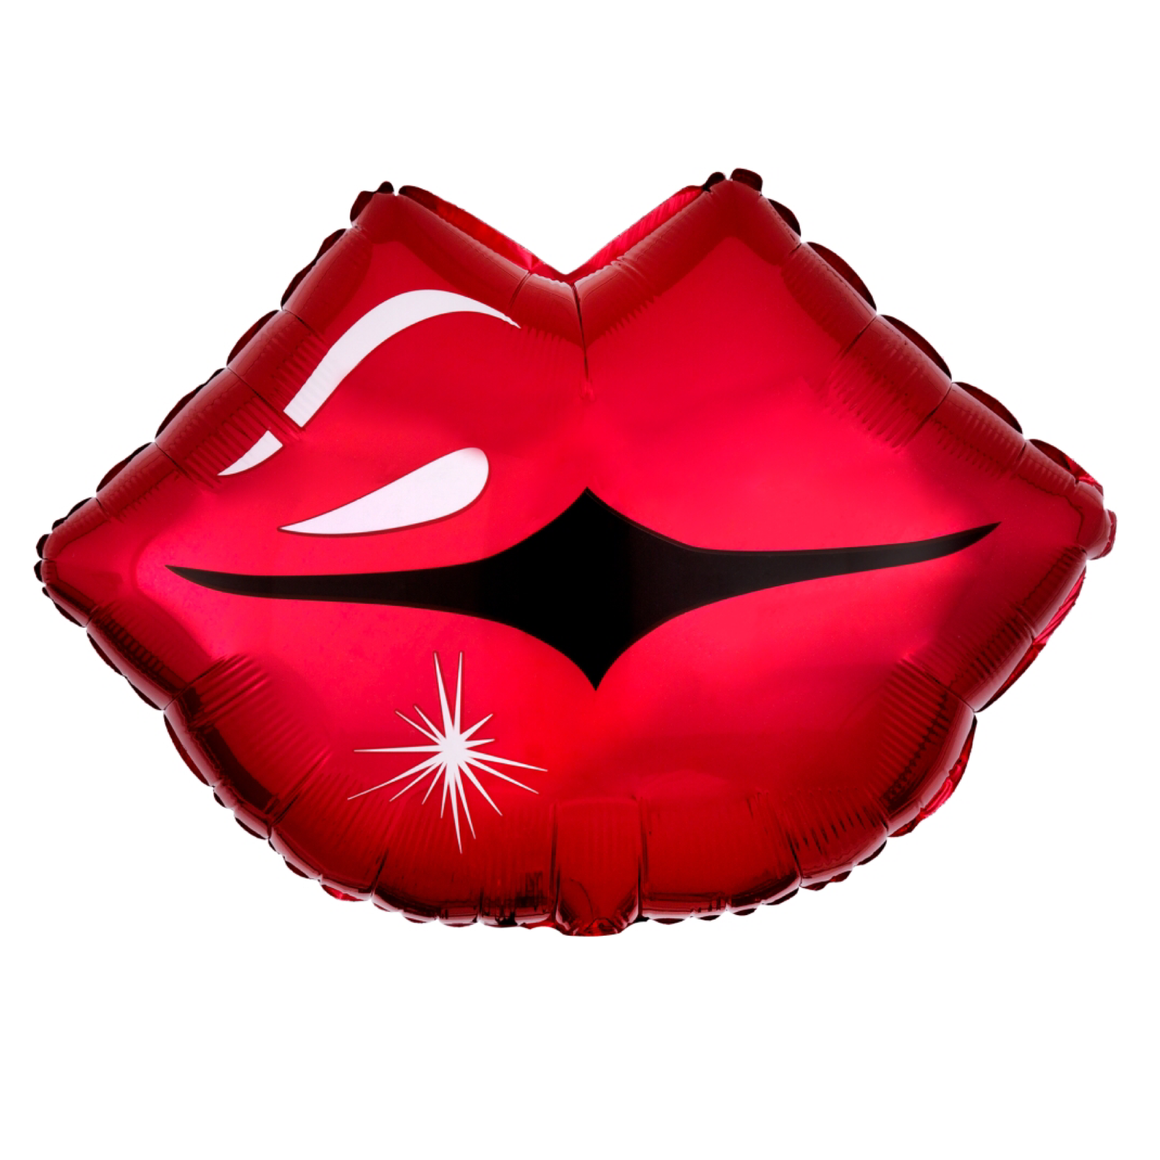 BALLOONS - RED POUT LIPS MEDIUM